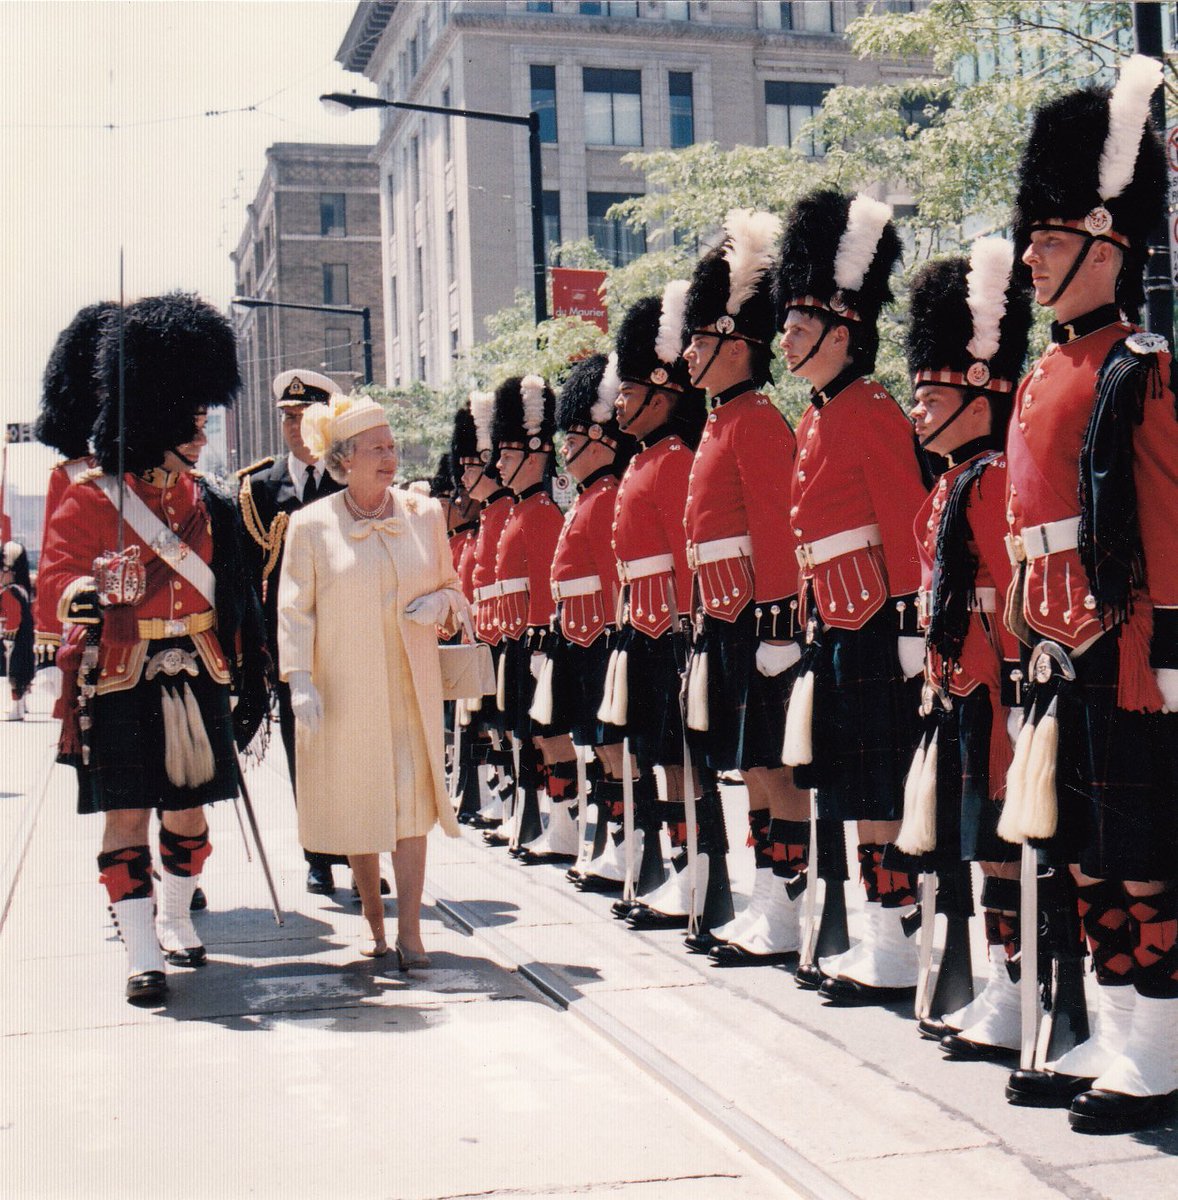 As Canada's head of state, Her Majesty The Queen has made several royal tours. Witness of historical events, she developed a great knowledge of Canada and a sincere appreciation for its peoples. View a selection of photos.➡️canada.ca/en/canadian-he… #QueenElizabethII @RoyalFamily